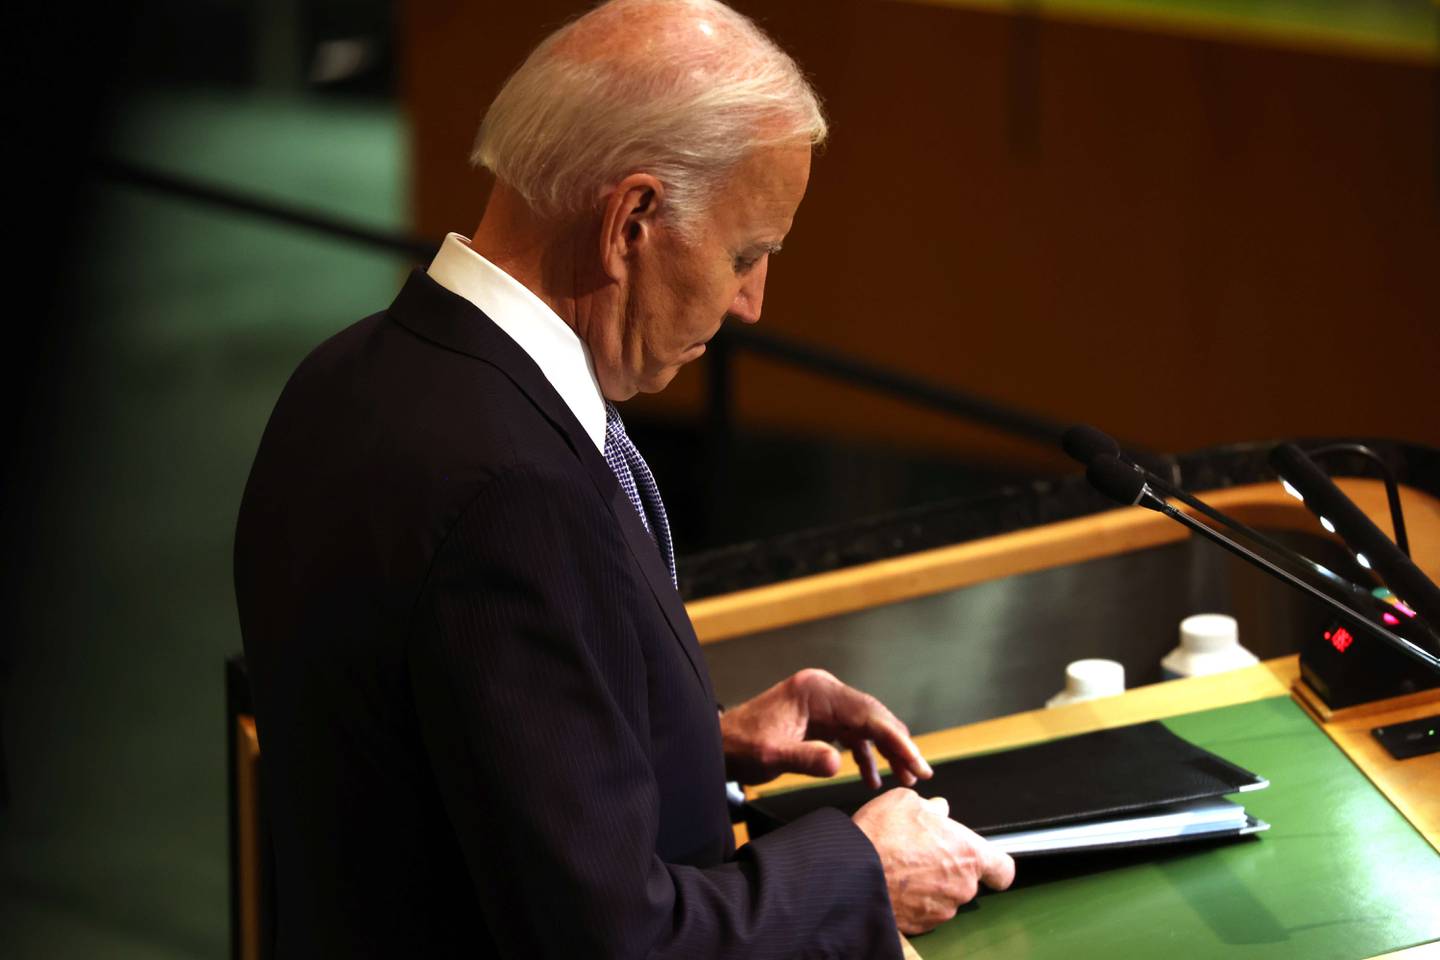 US President Joe Biden speaks at the UN General Assembly in New York on Wednesday. AFP